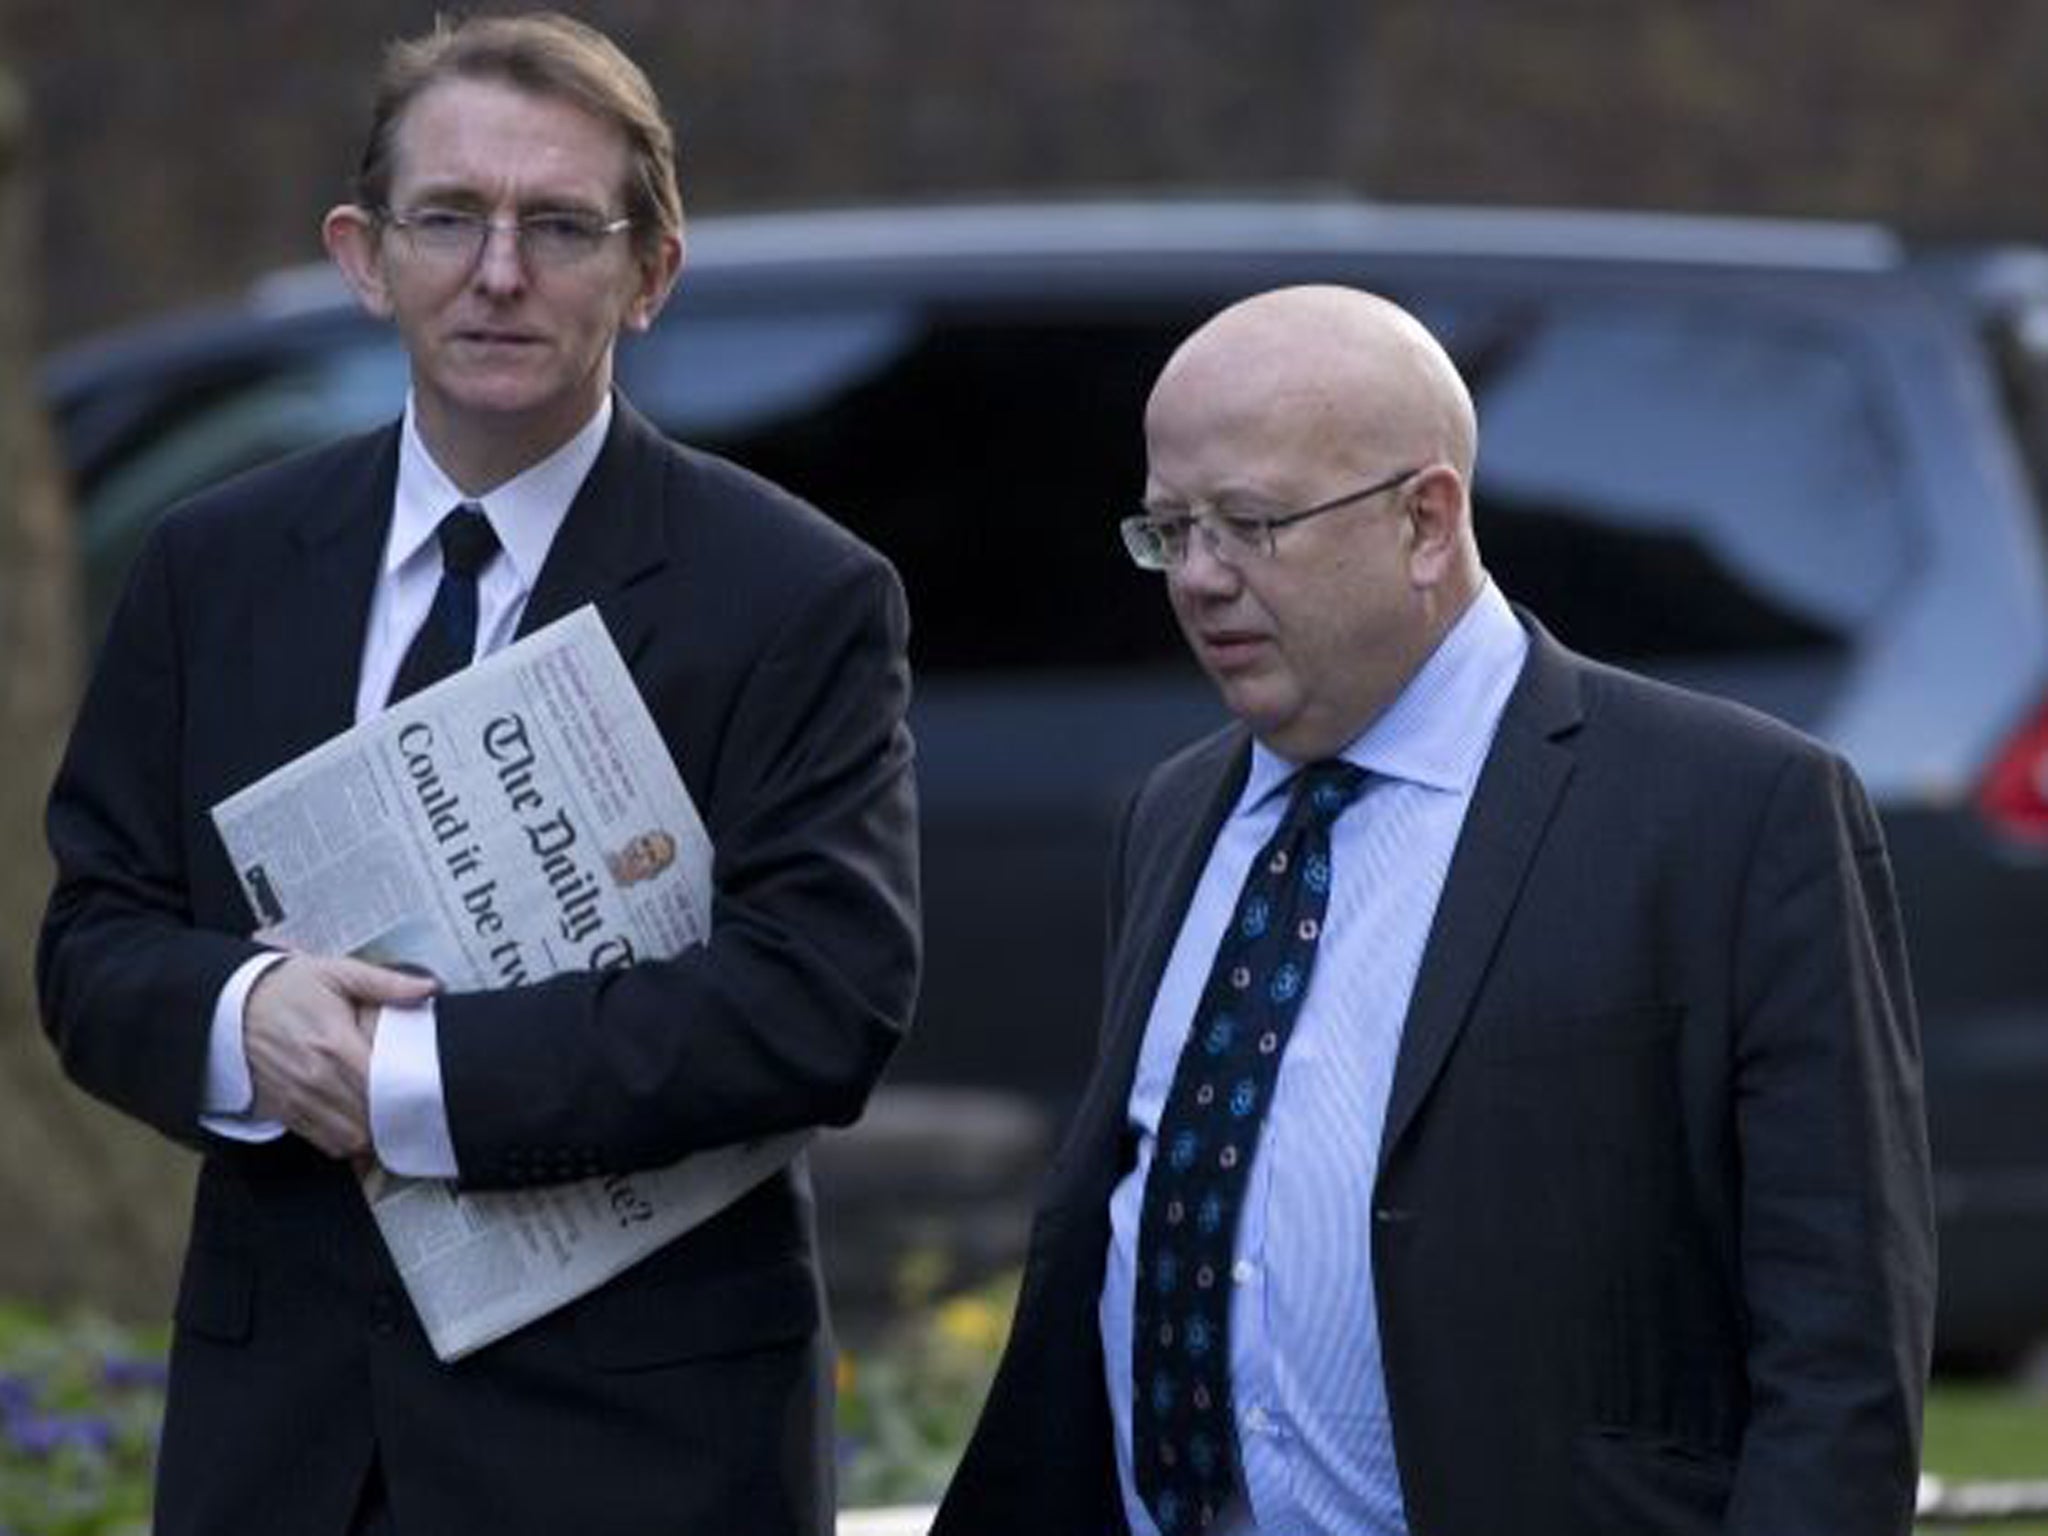 Editor of The Independent Chris Blackhurst, right, arrives for the meeting with other newspaper editors and David Cameron alongside Telegraph editor Tony Gallagher